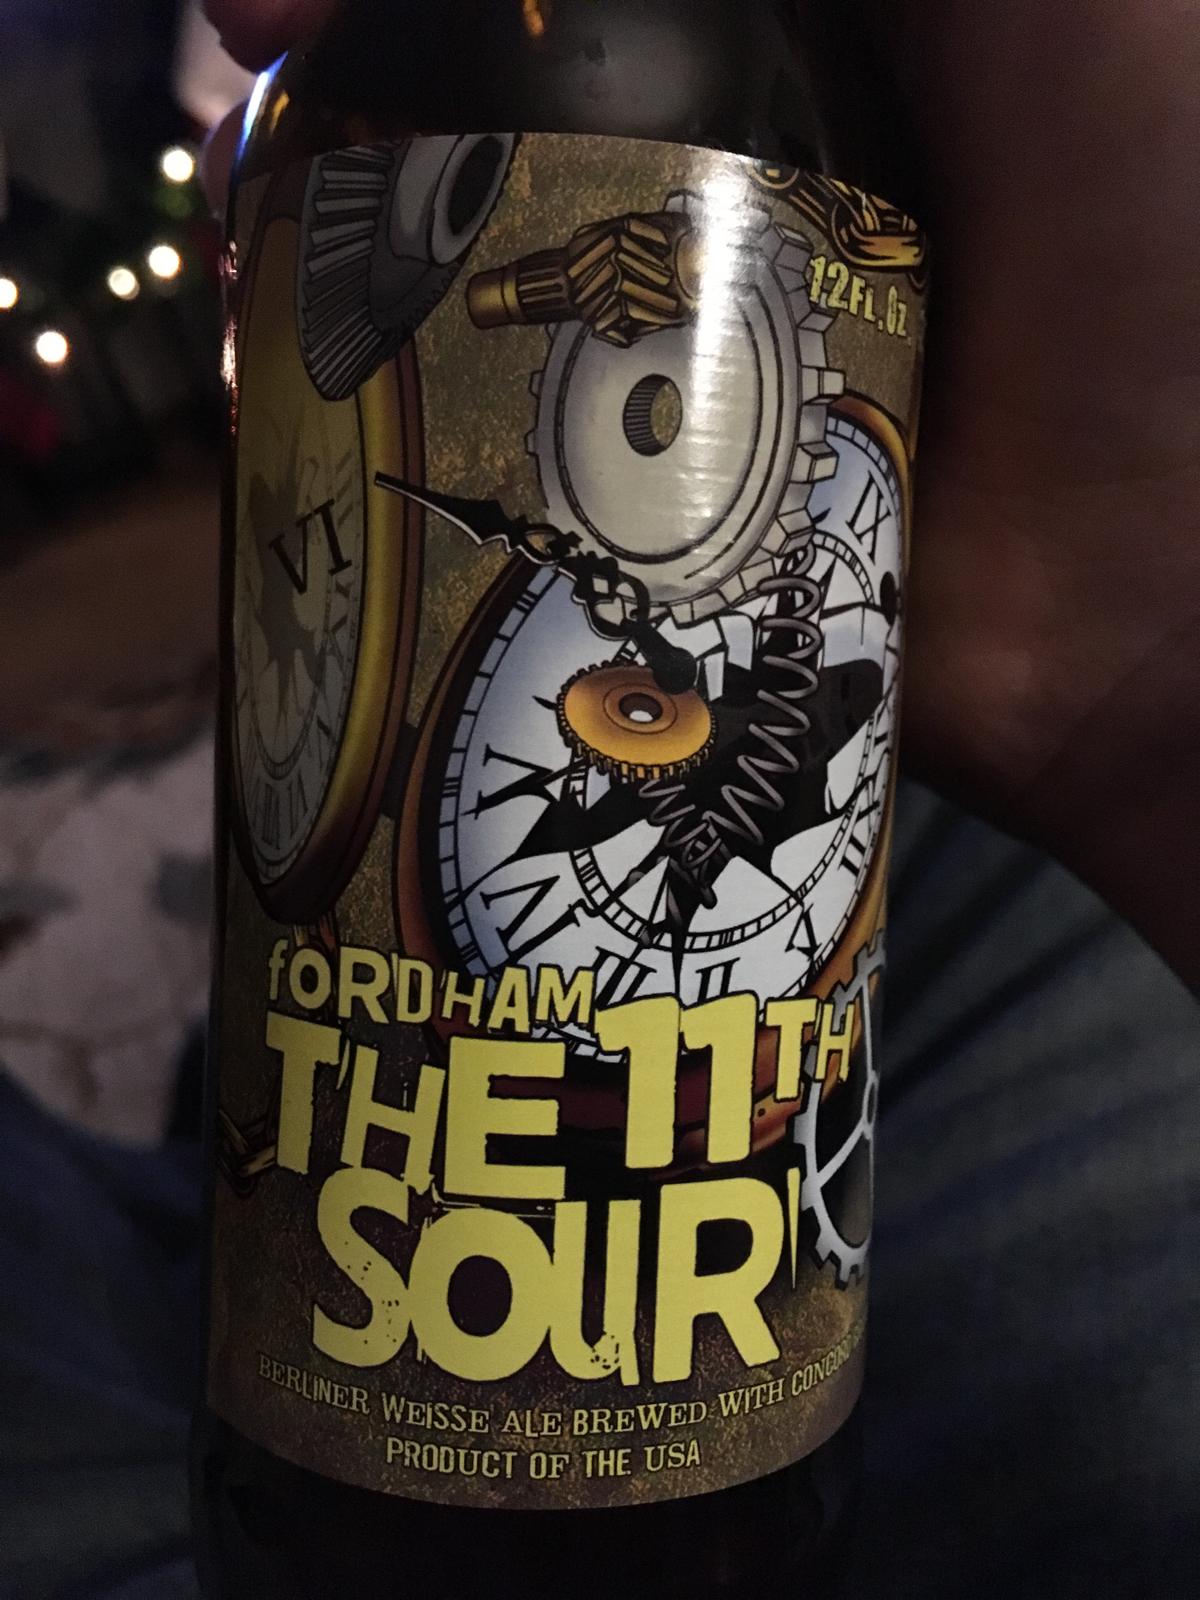 The 11th Sour